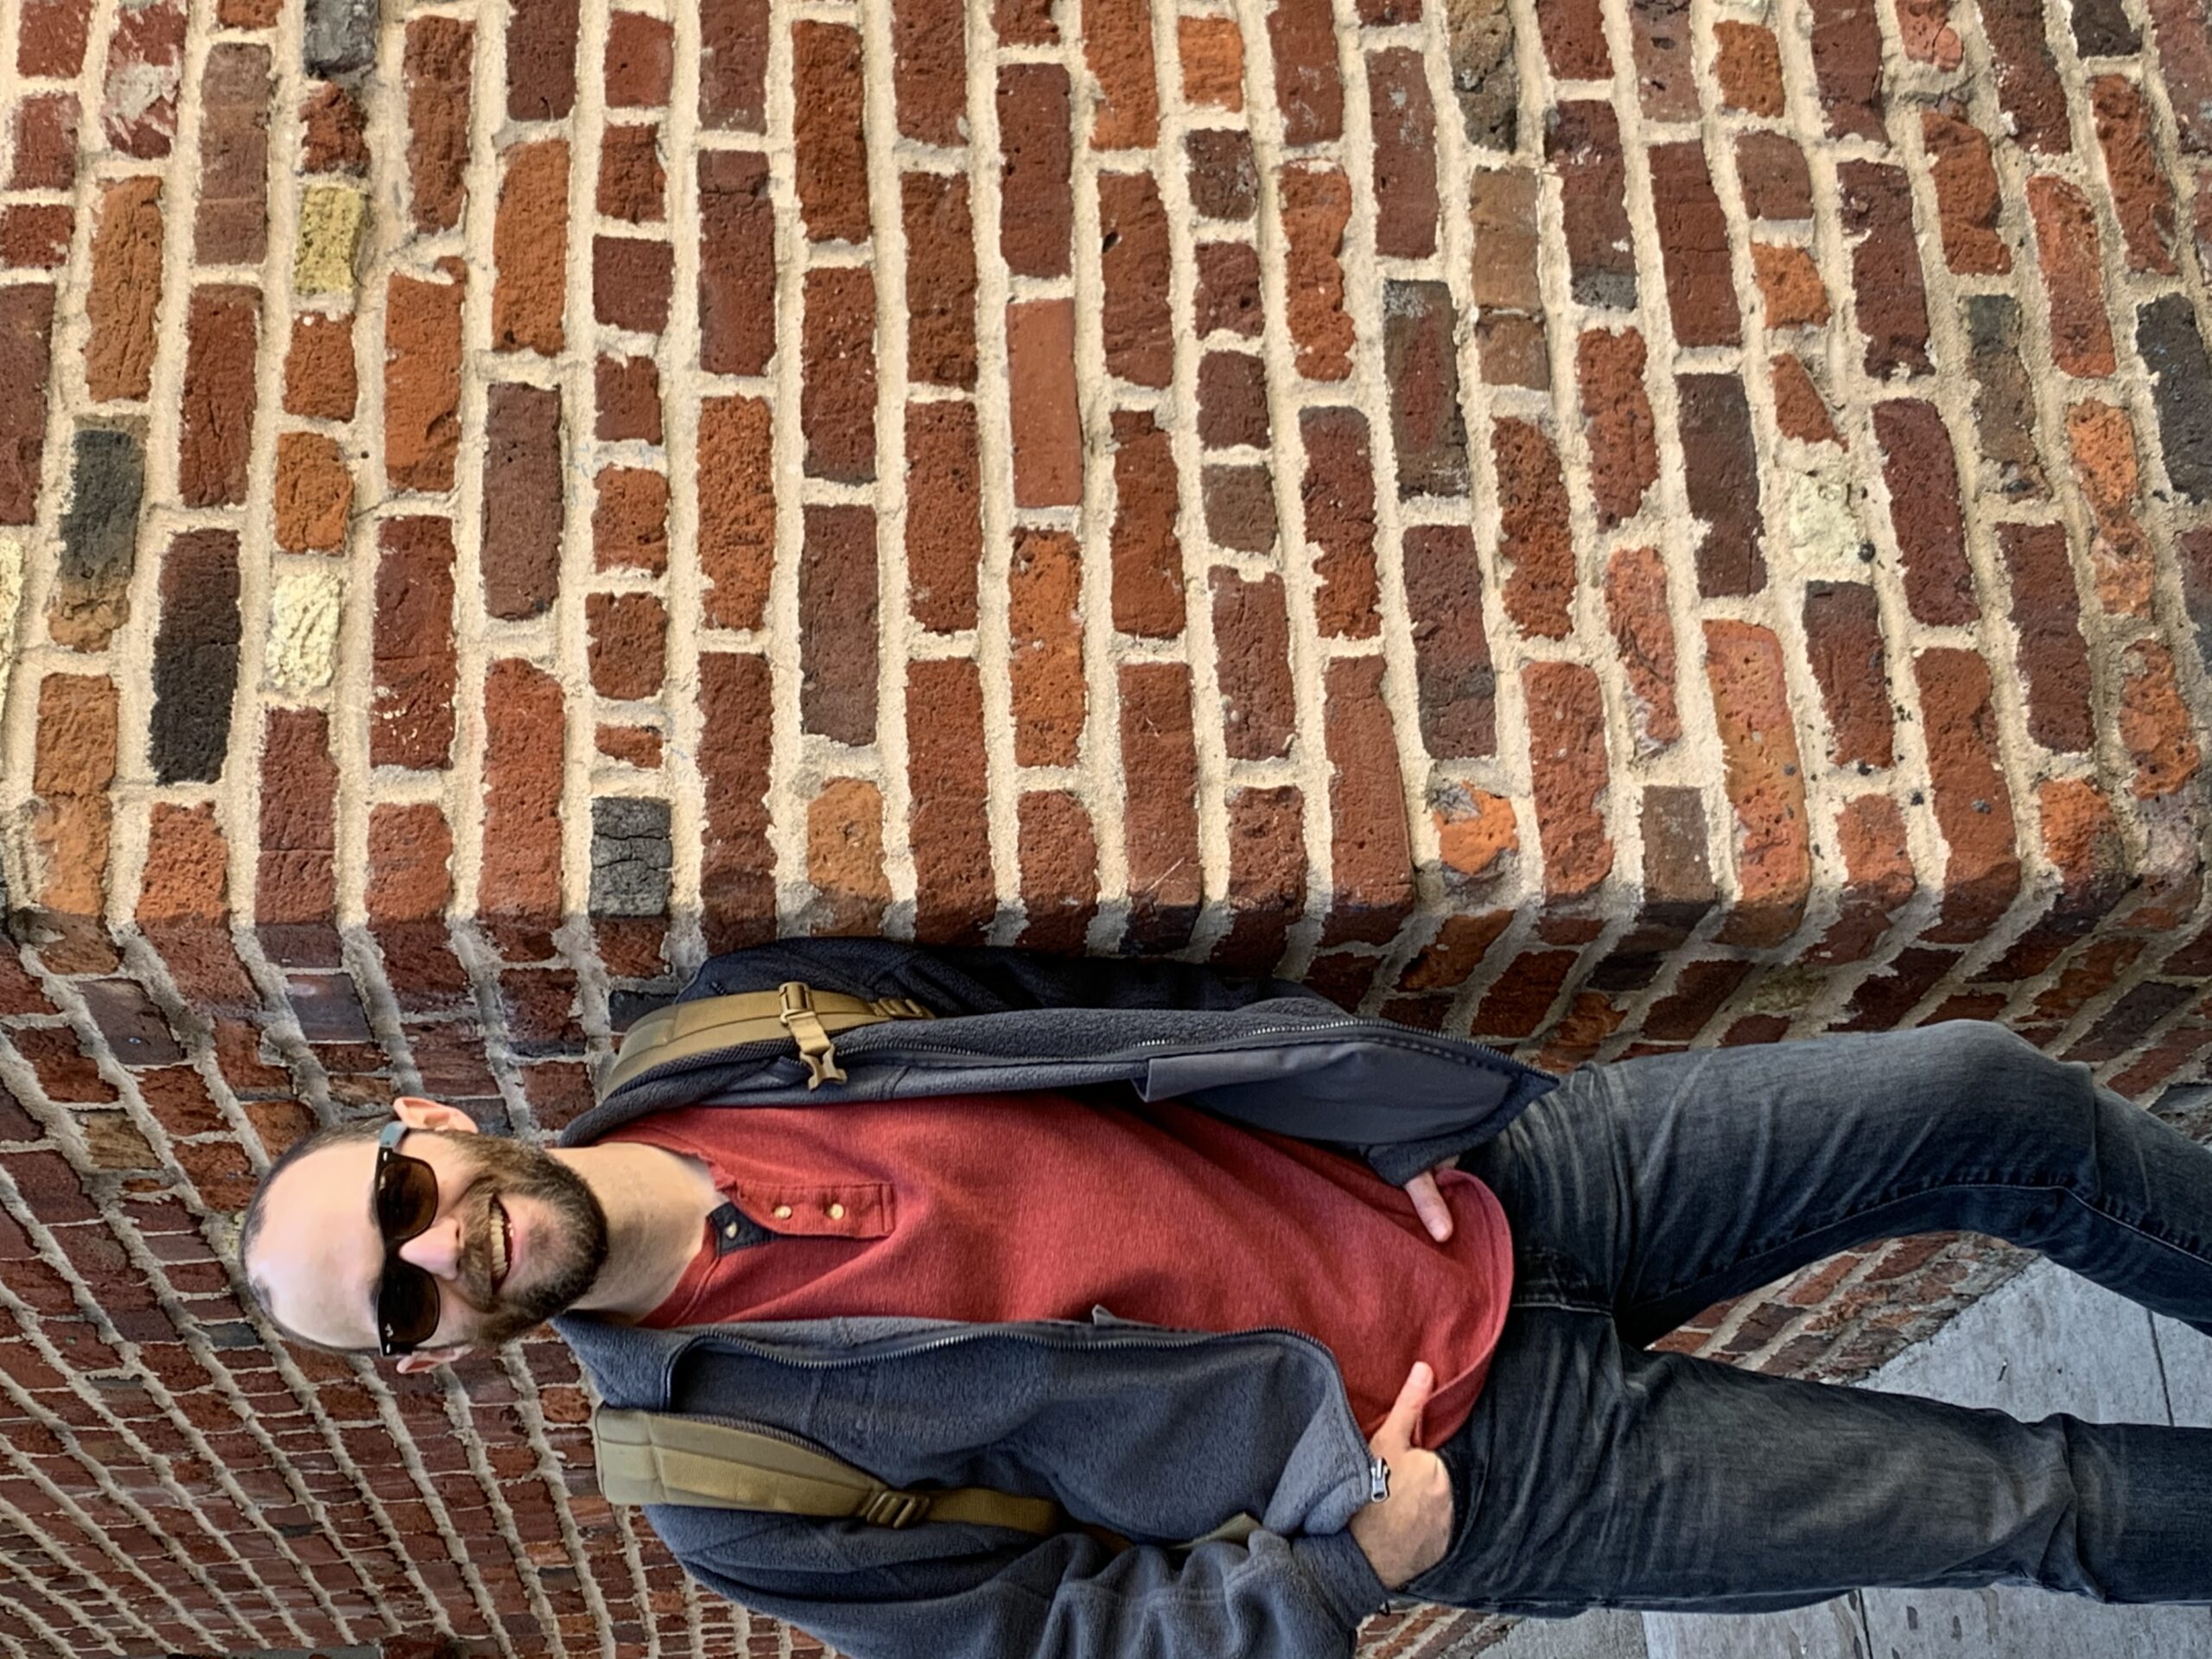 Image of ID fellow Dr. Bryan Walker wearing a red shirt and blue jacket and dark blue jeans and sunglasses leaning against a brick wall